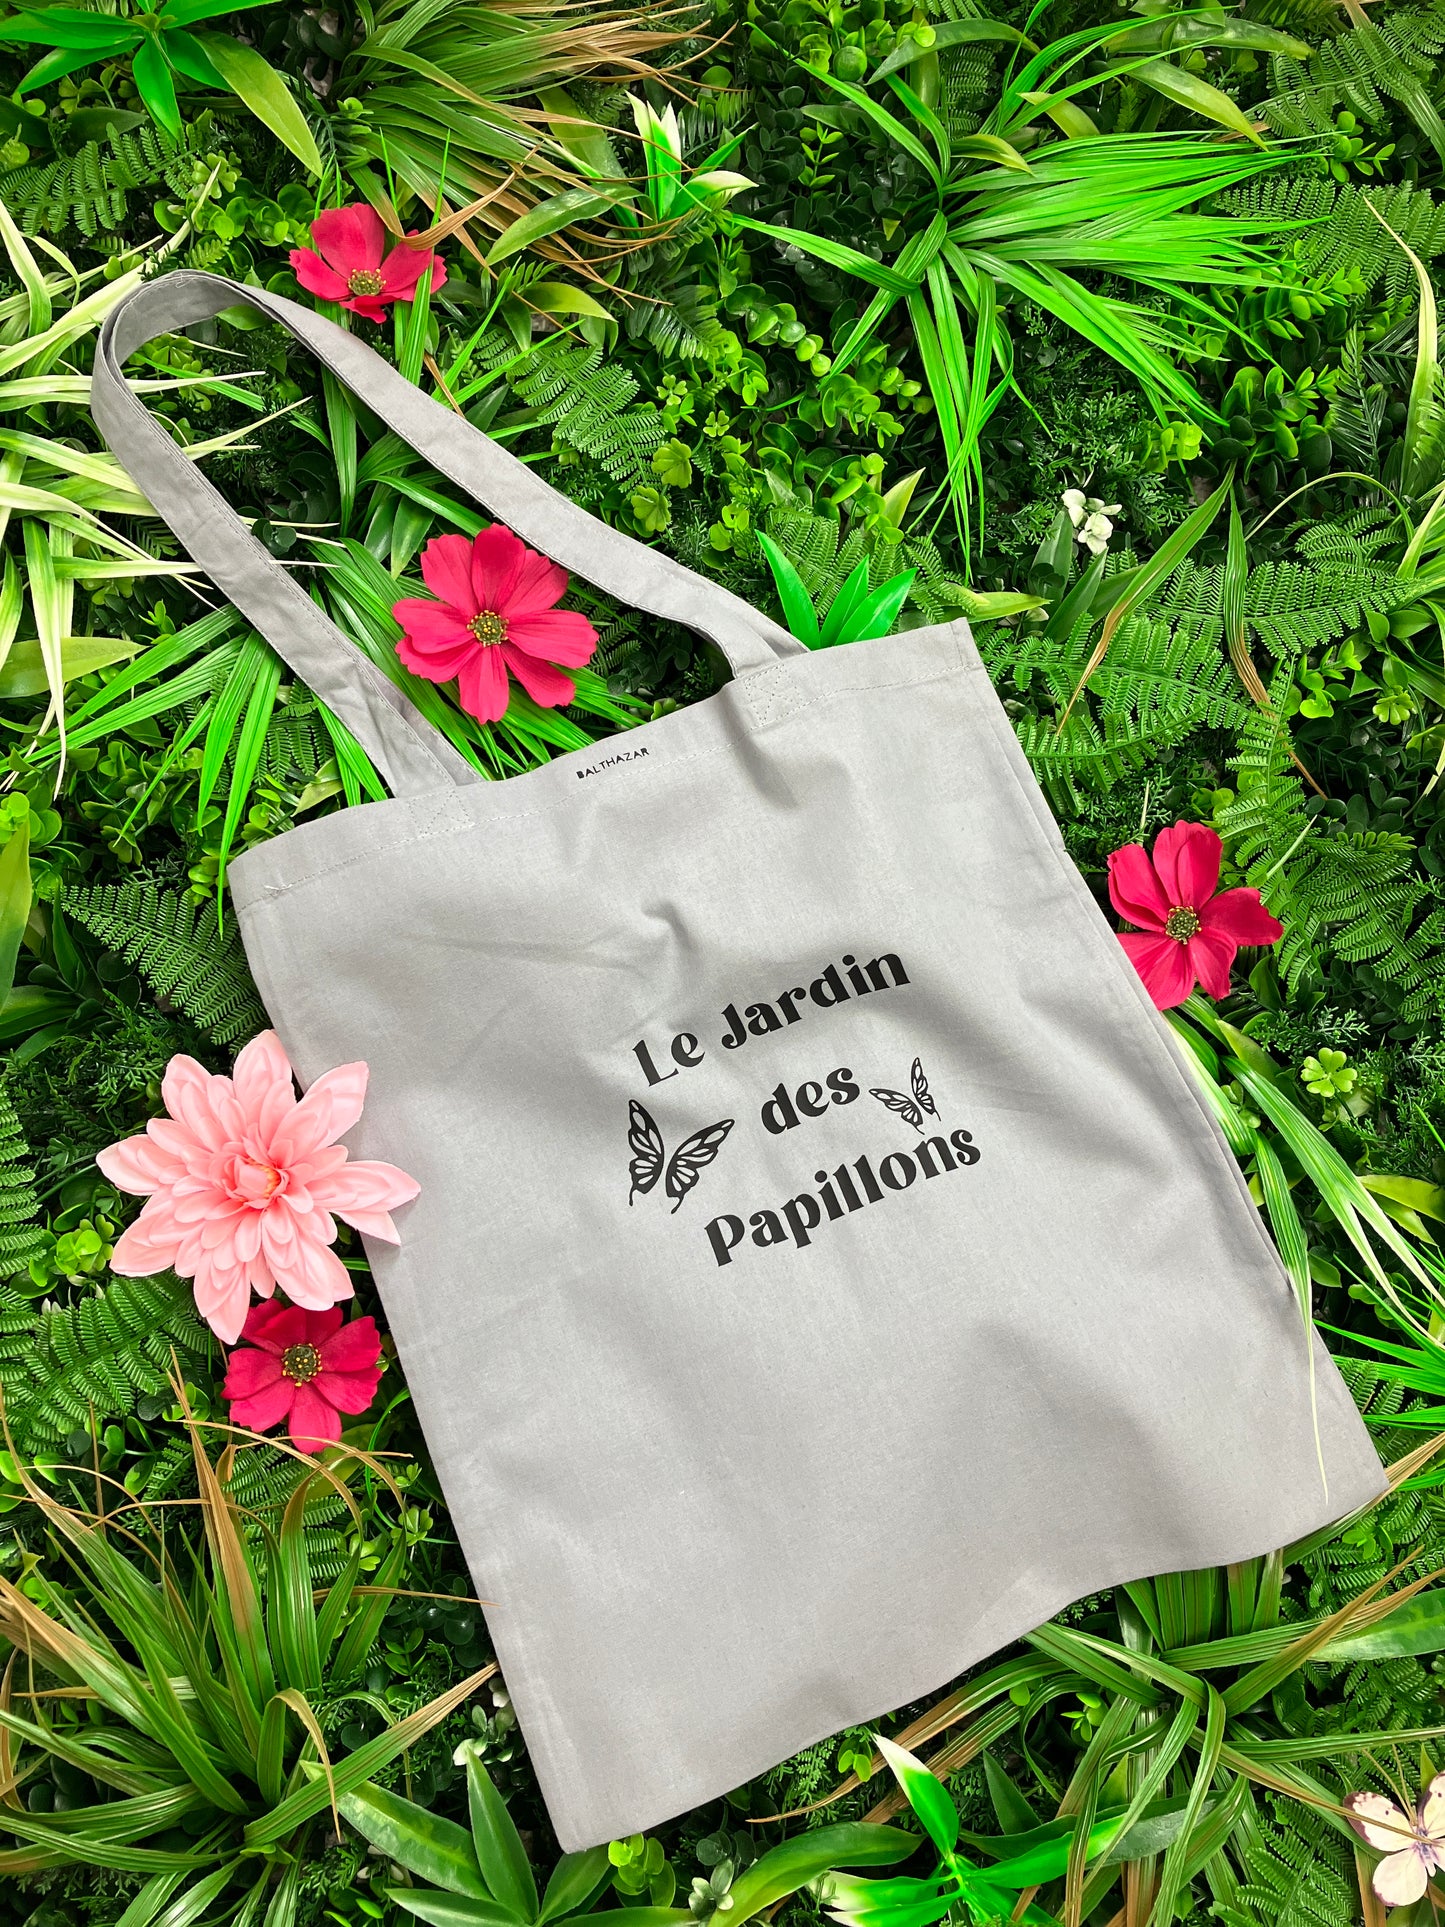 The Butterfly garden tote bag